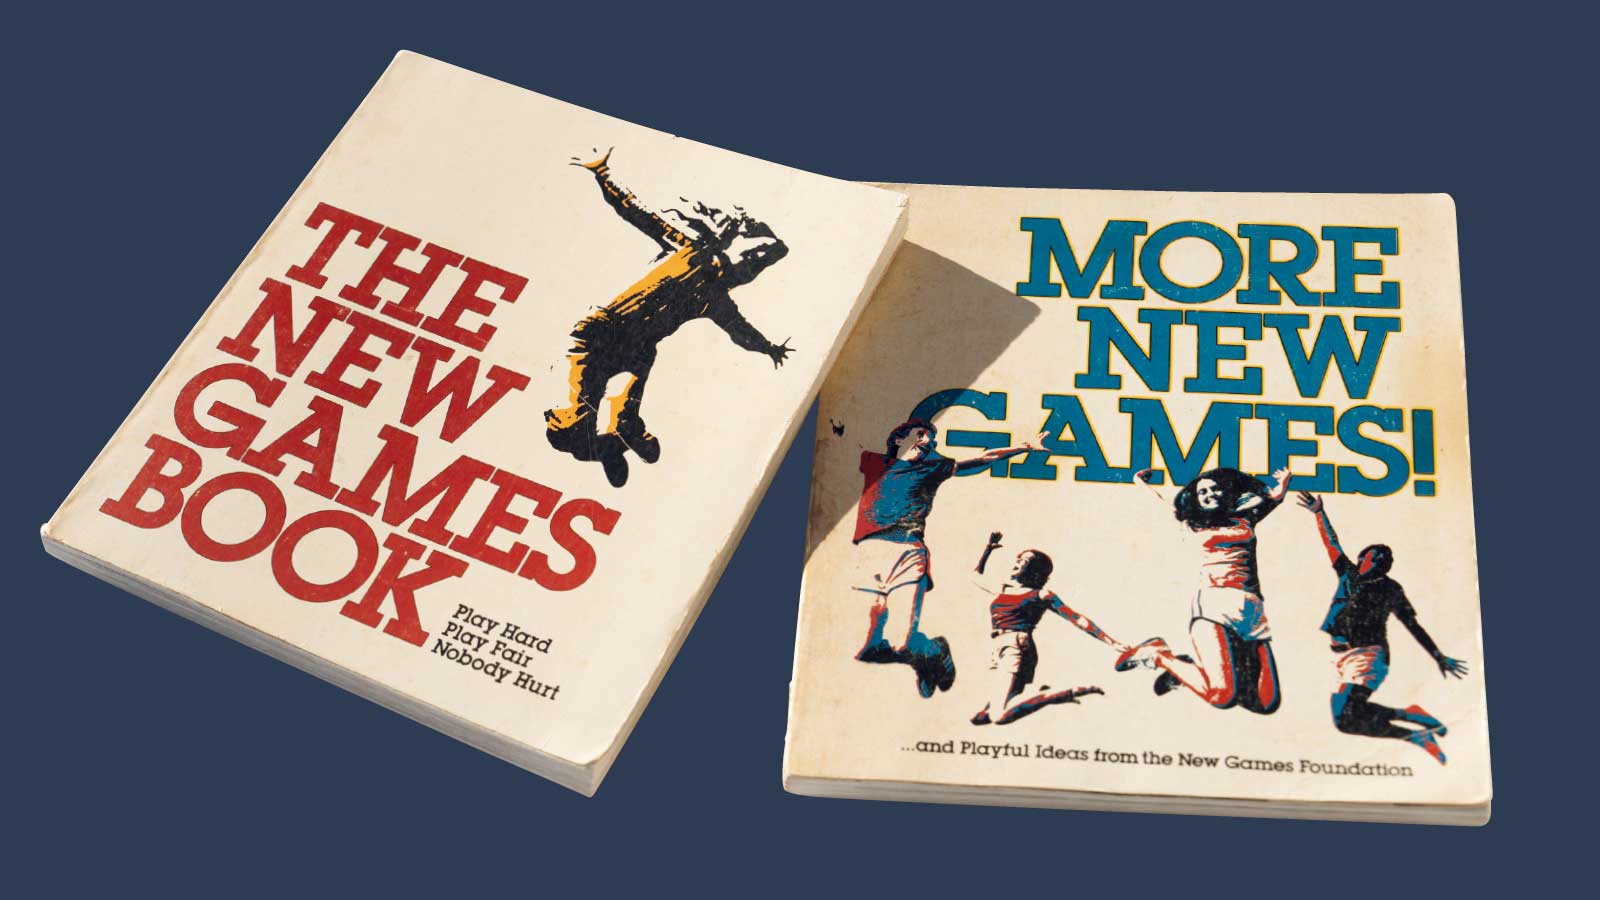 『THE NEW GAMES BOOK』（1976）と、続編の『MORE NEW GAMES!』（1981）